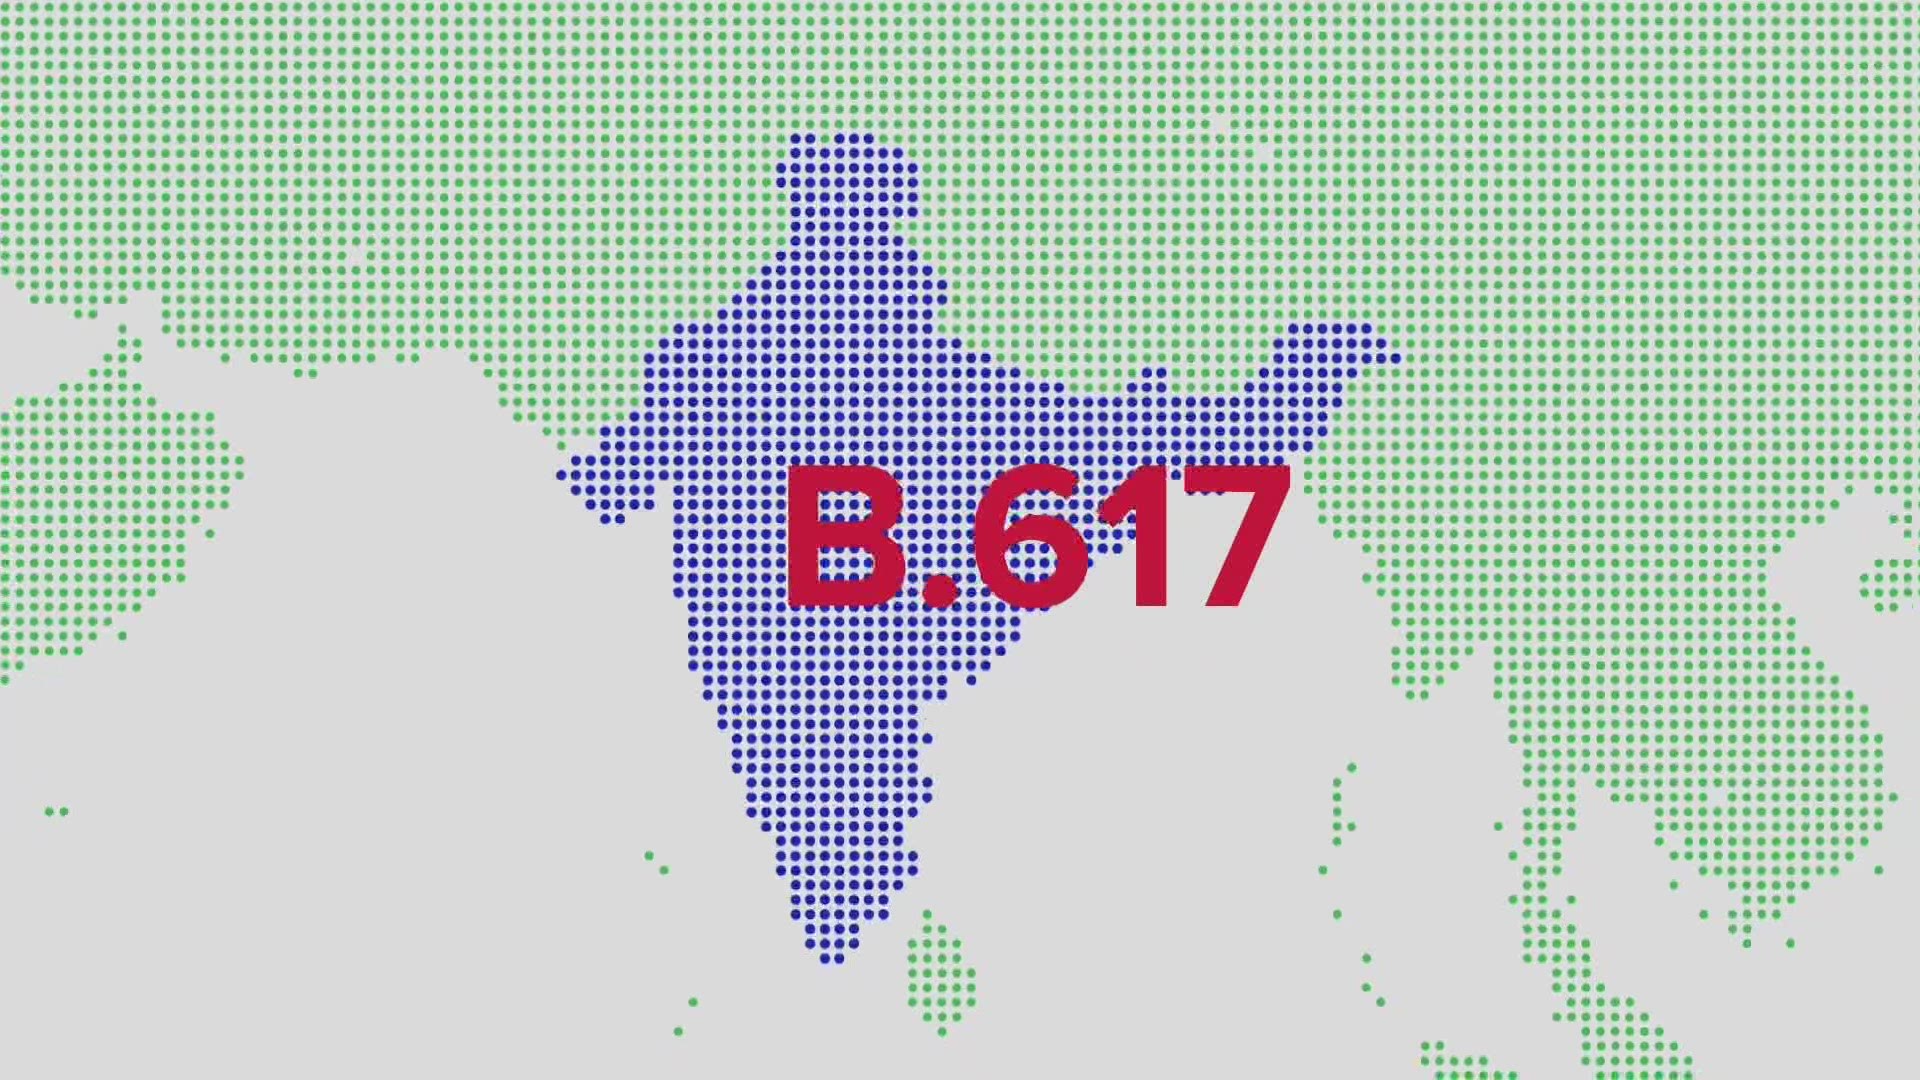 It originated in India. Known to the World Health Organization as B.617, the variant has spread to dozens of other countries.